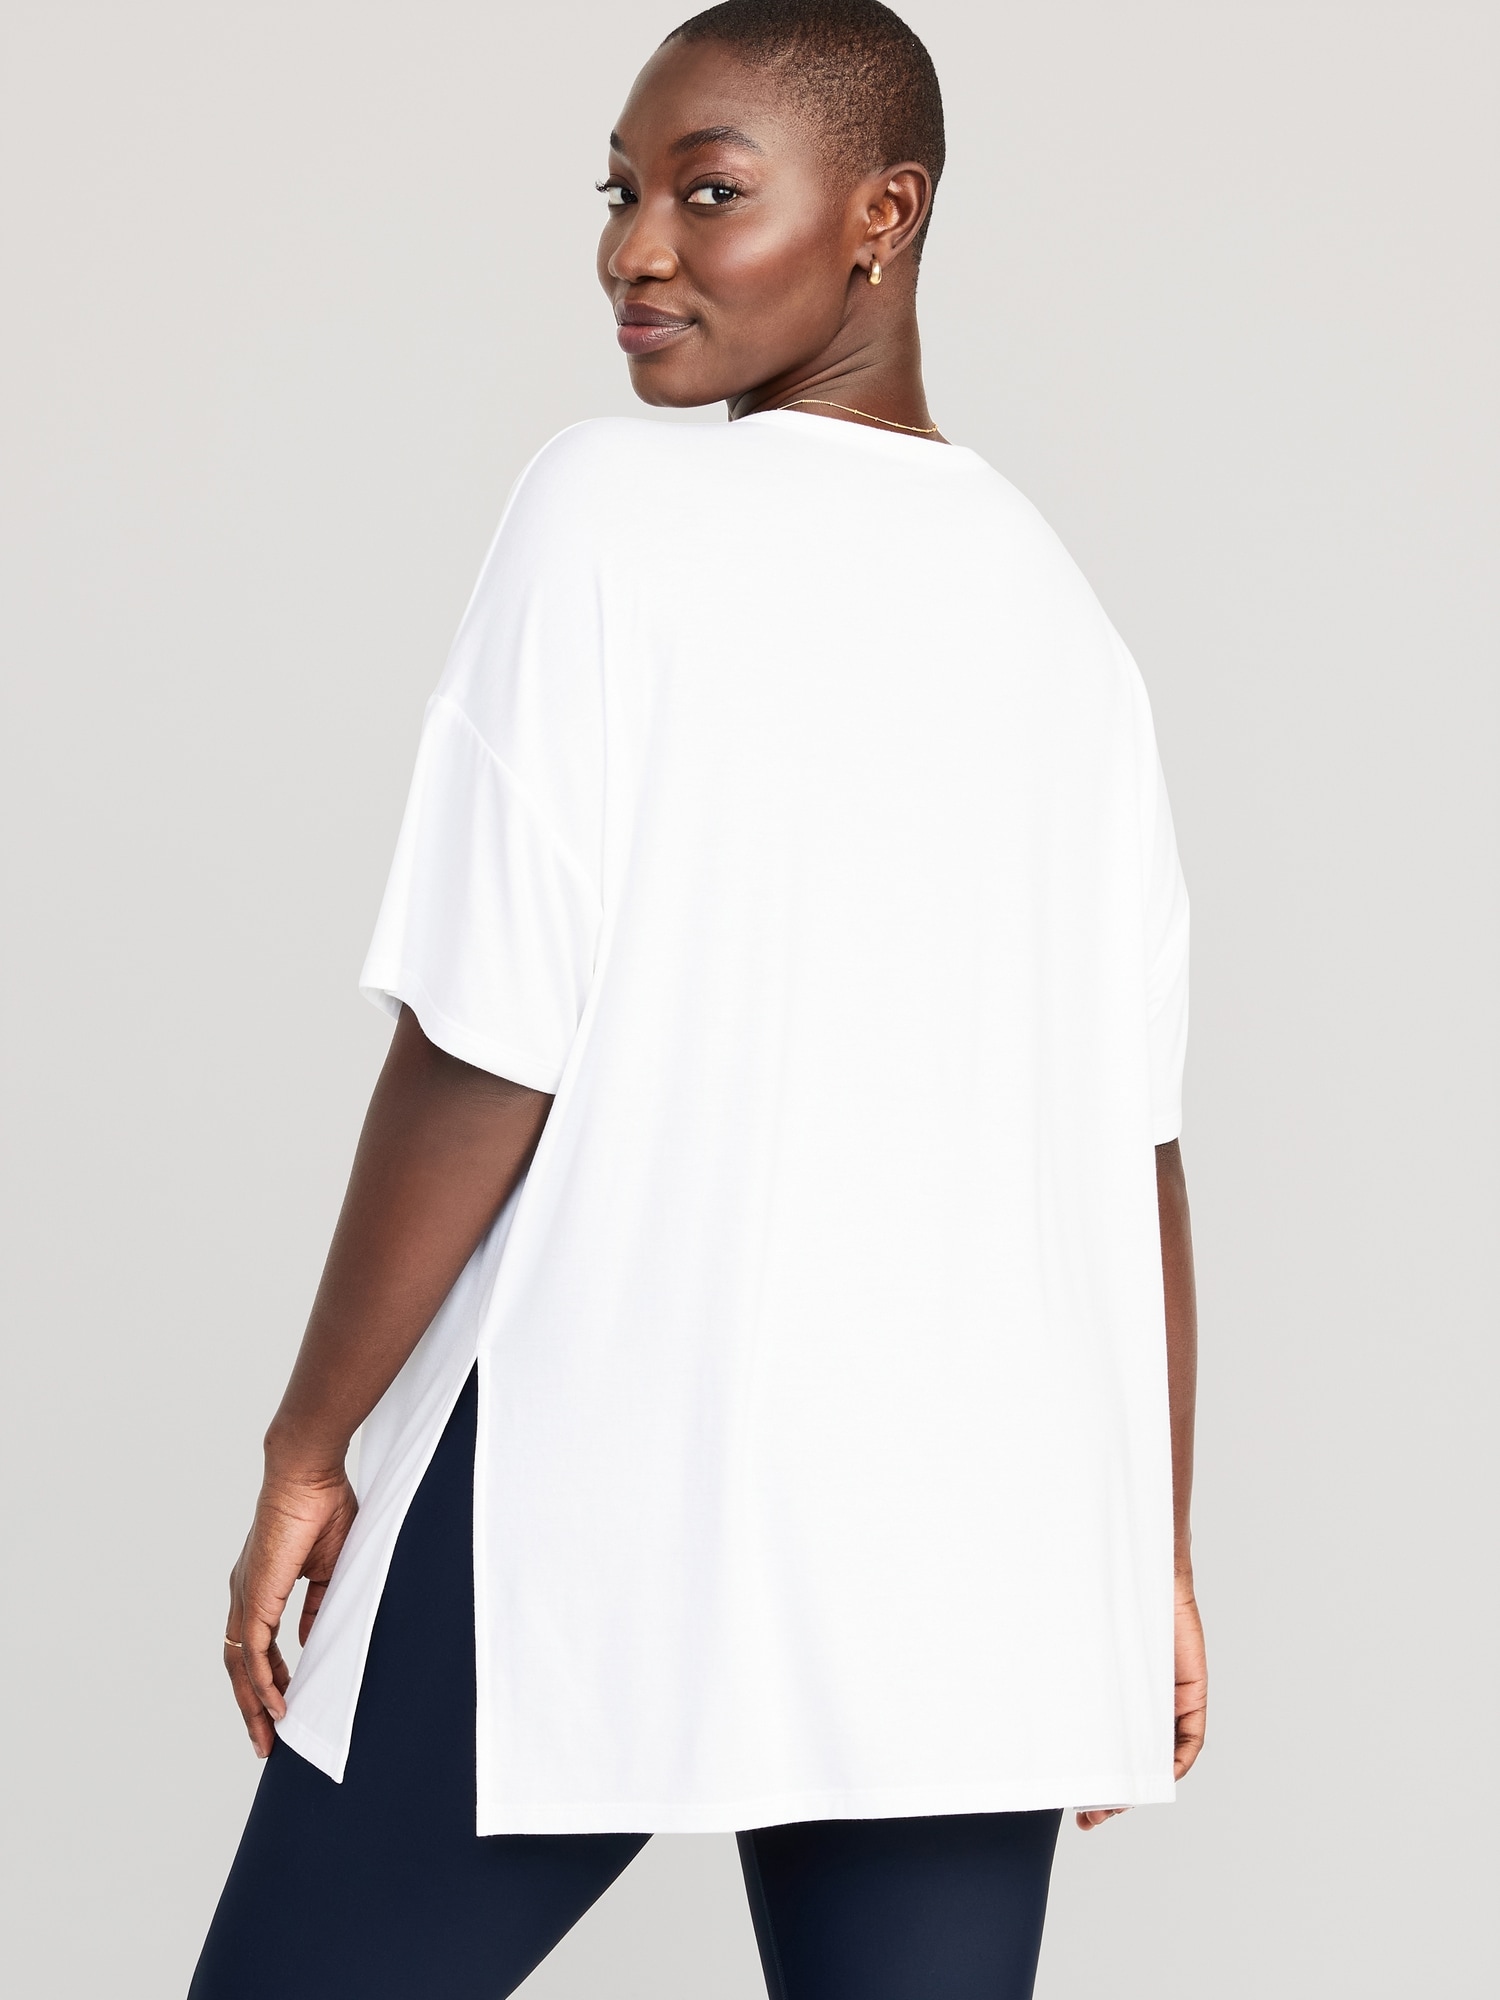 død Snavset Fugtighed Oversized UltraLite All-Day Performance T-Shirt for Women | Old Navy